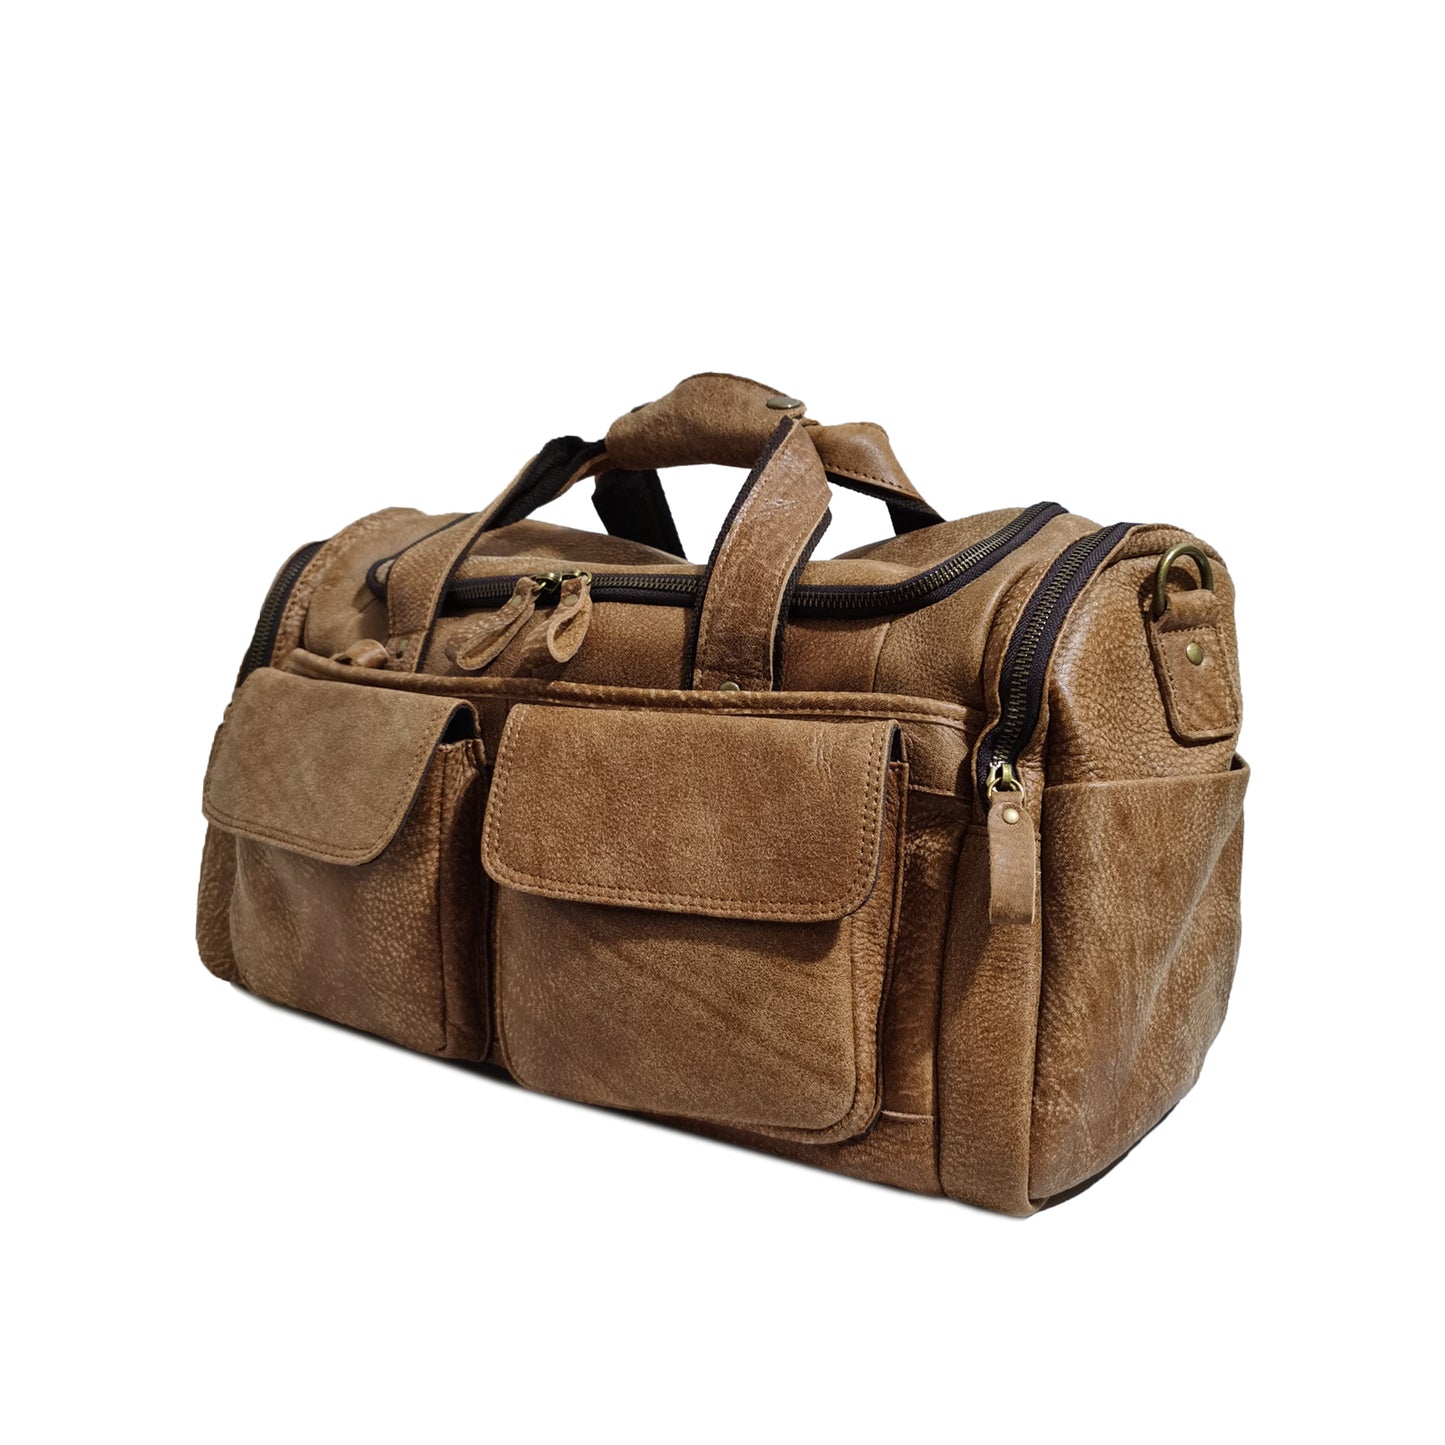 Unisex Women's and Men's genuine cowhide leather duffel travel bag Poches design